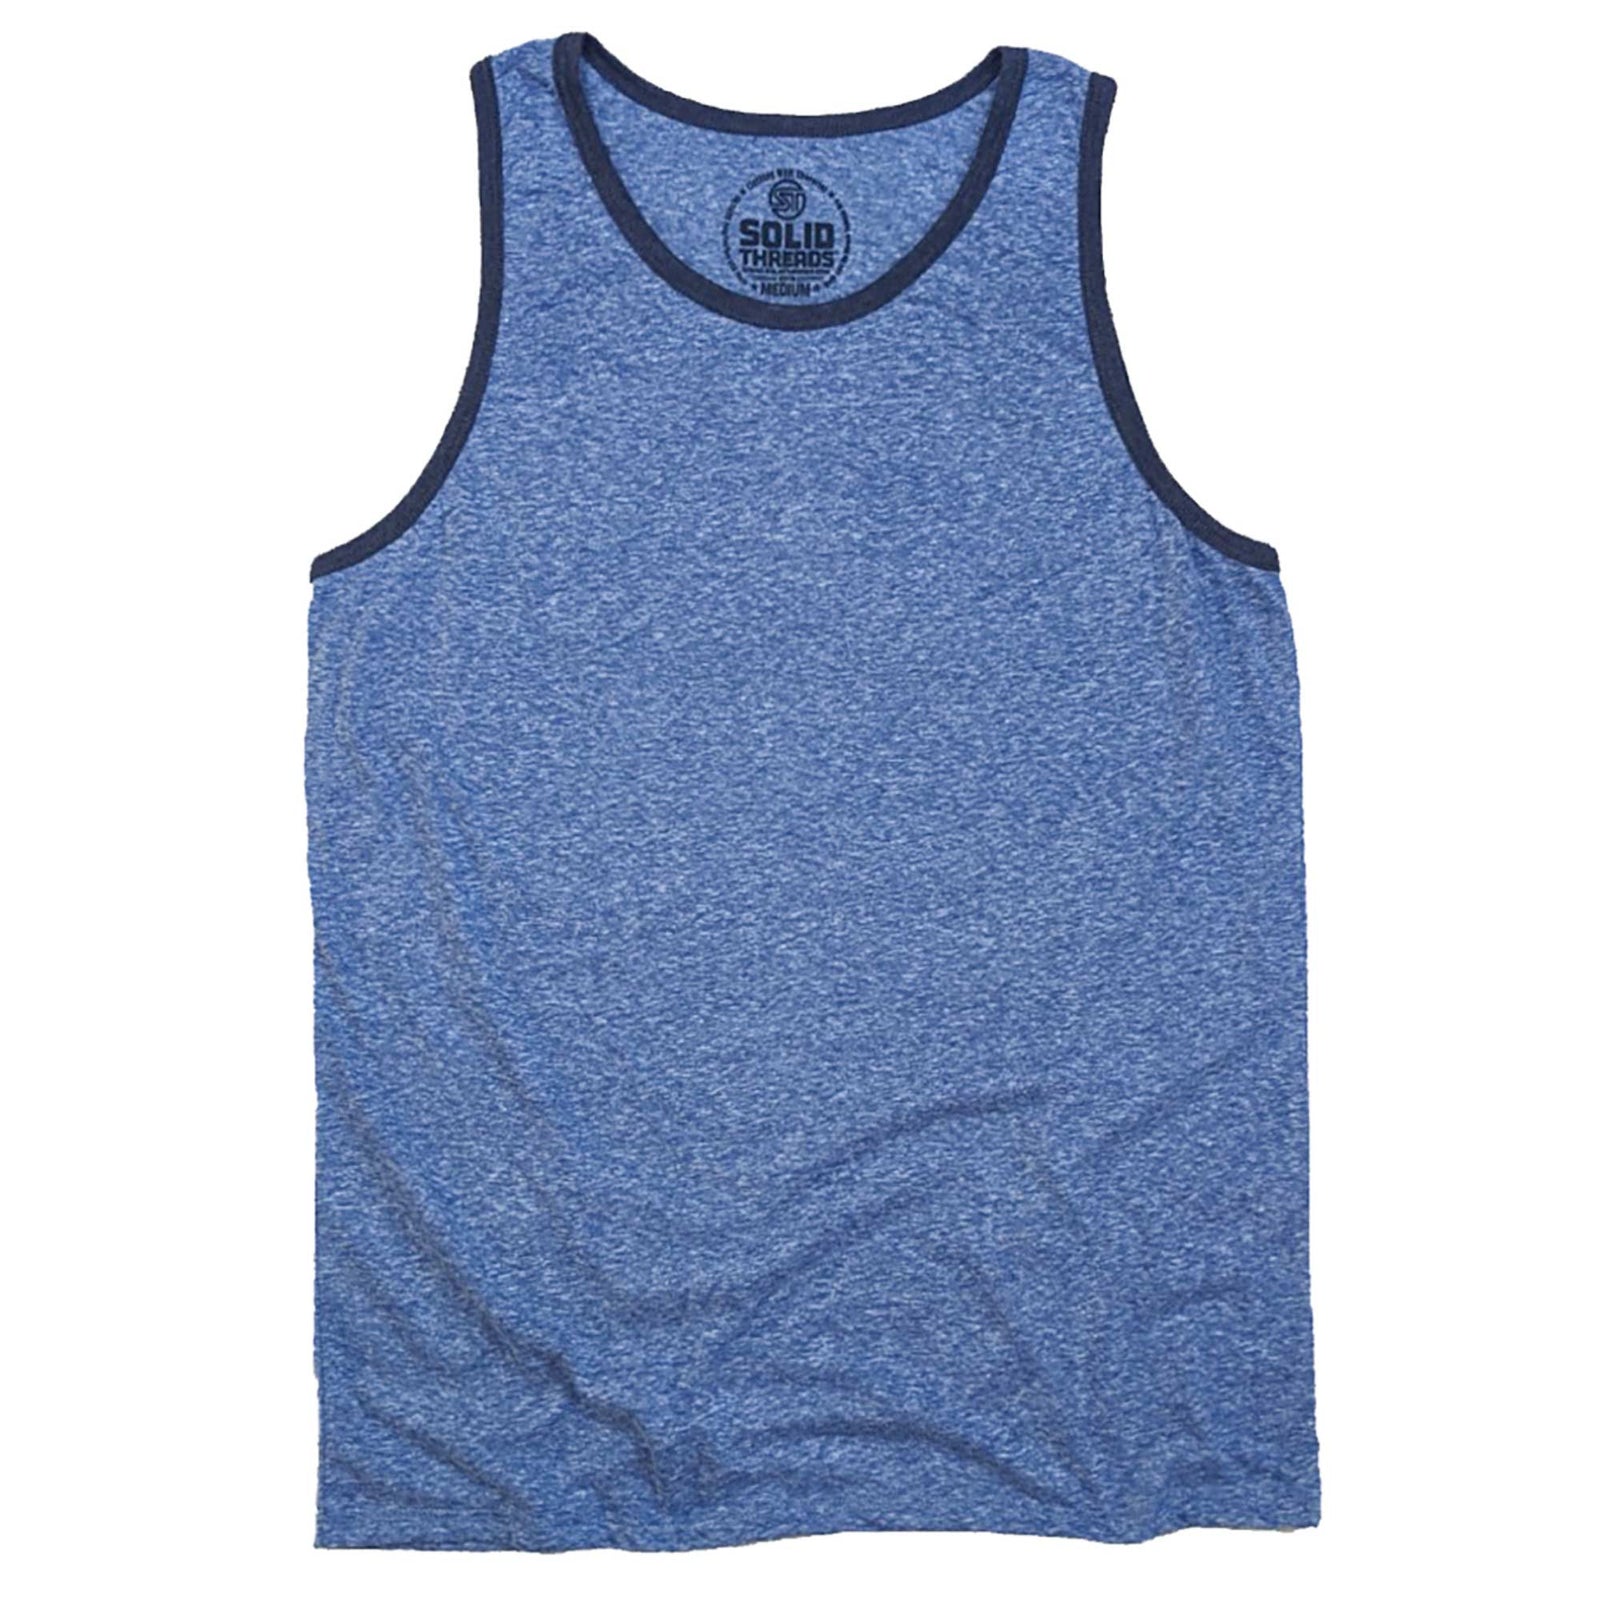 Men's Solid Threads Retro Ringer Tank Top Triblend Royal/Navy | Vintage Inspired USA Made Tank Top